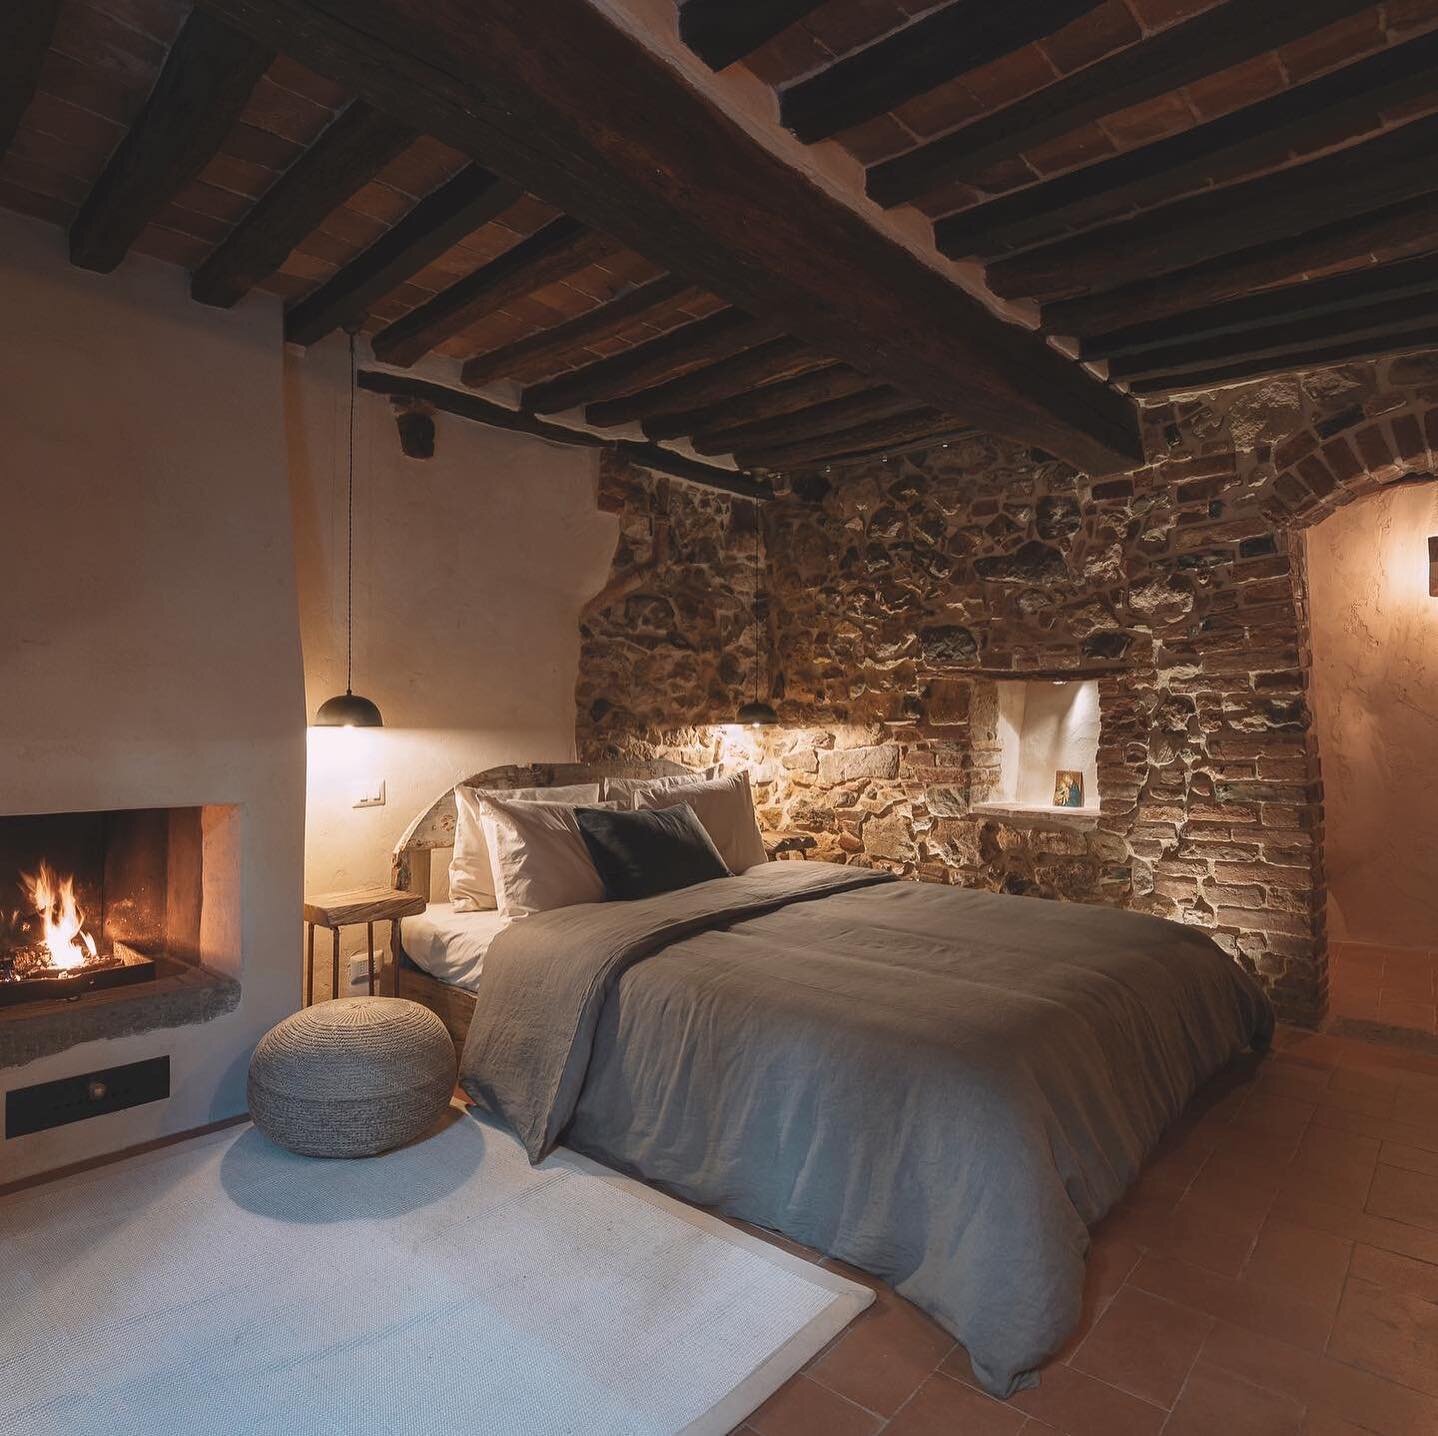 The enchantment of Tuscany awaits you at Borgo di Sotto! ✨

A Kynder exclusive (hosted by yours truly), Borgo di Sotto was created with love, as sustainably as possible 🥰 

&lsquo;La Segreta&rsquo; seen here, used to be a stable for farm animals in 